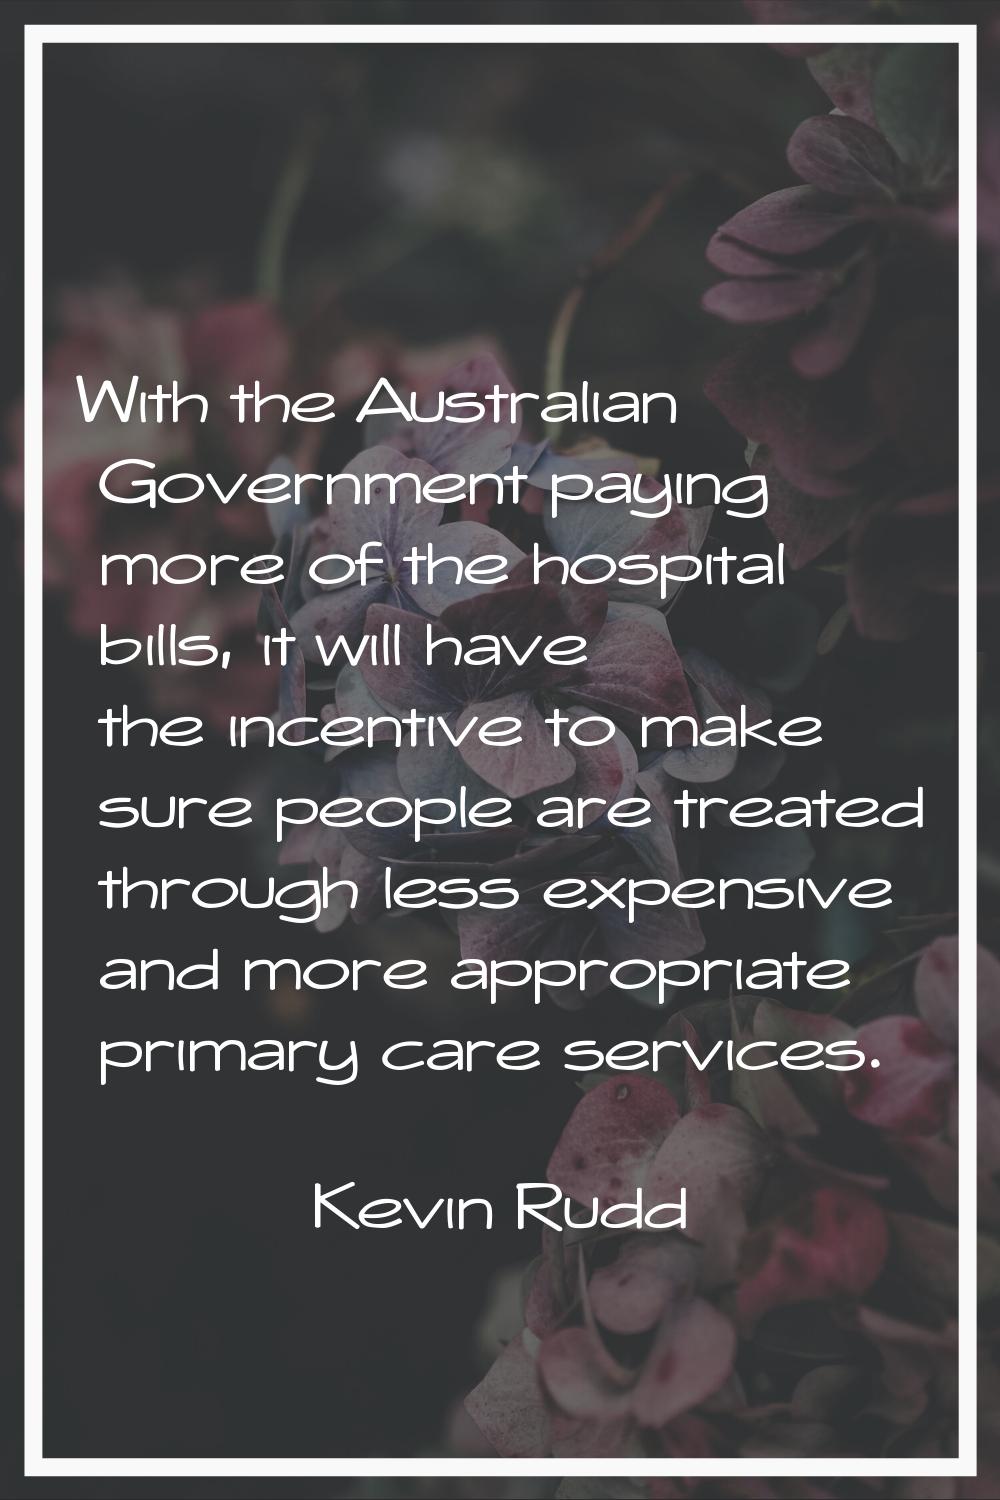 With the Australian Government paying more of the hospital bills, it will have the incentive to mak